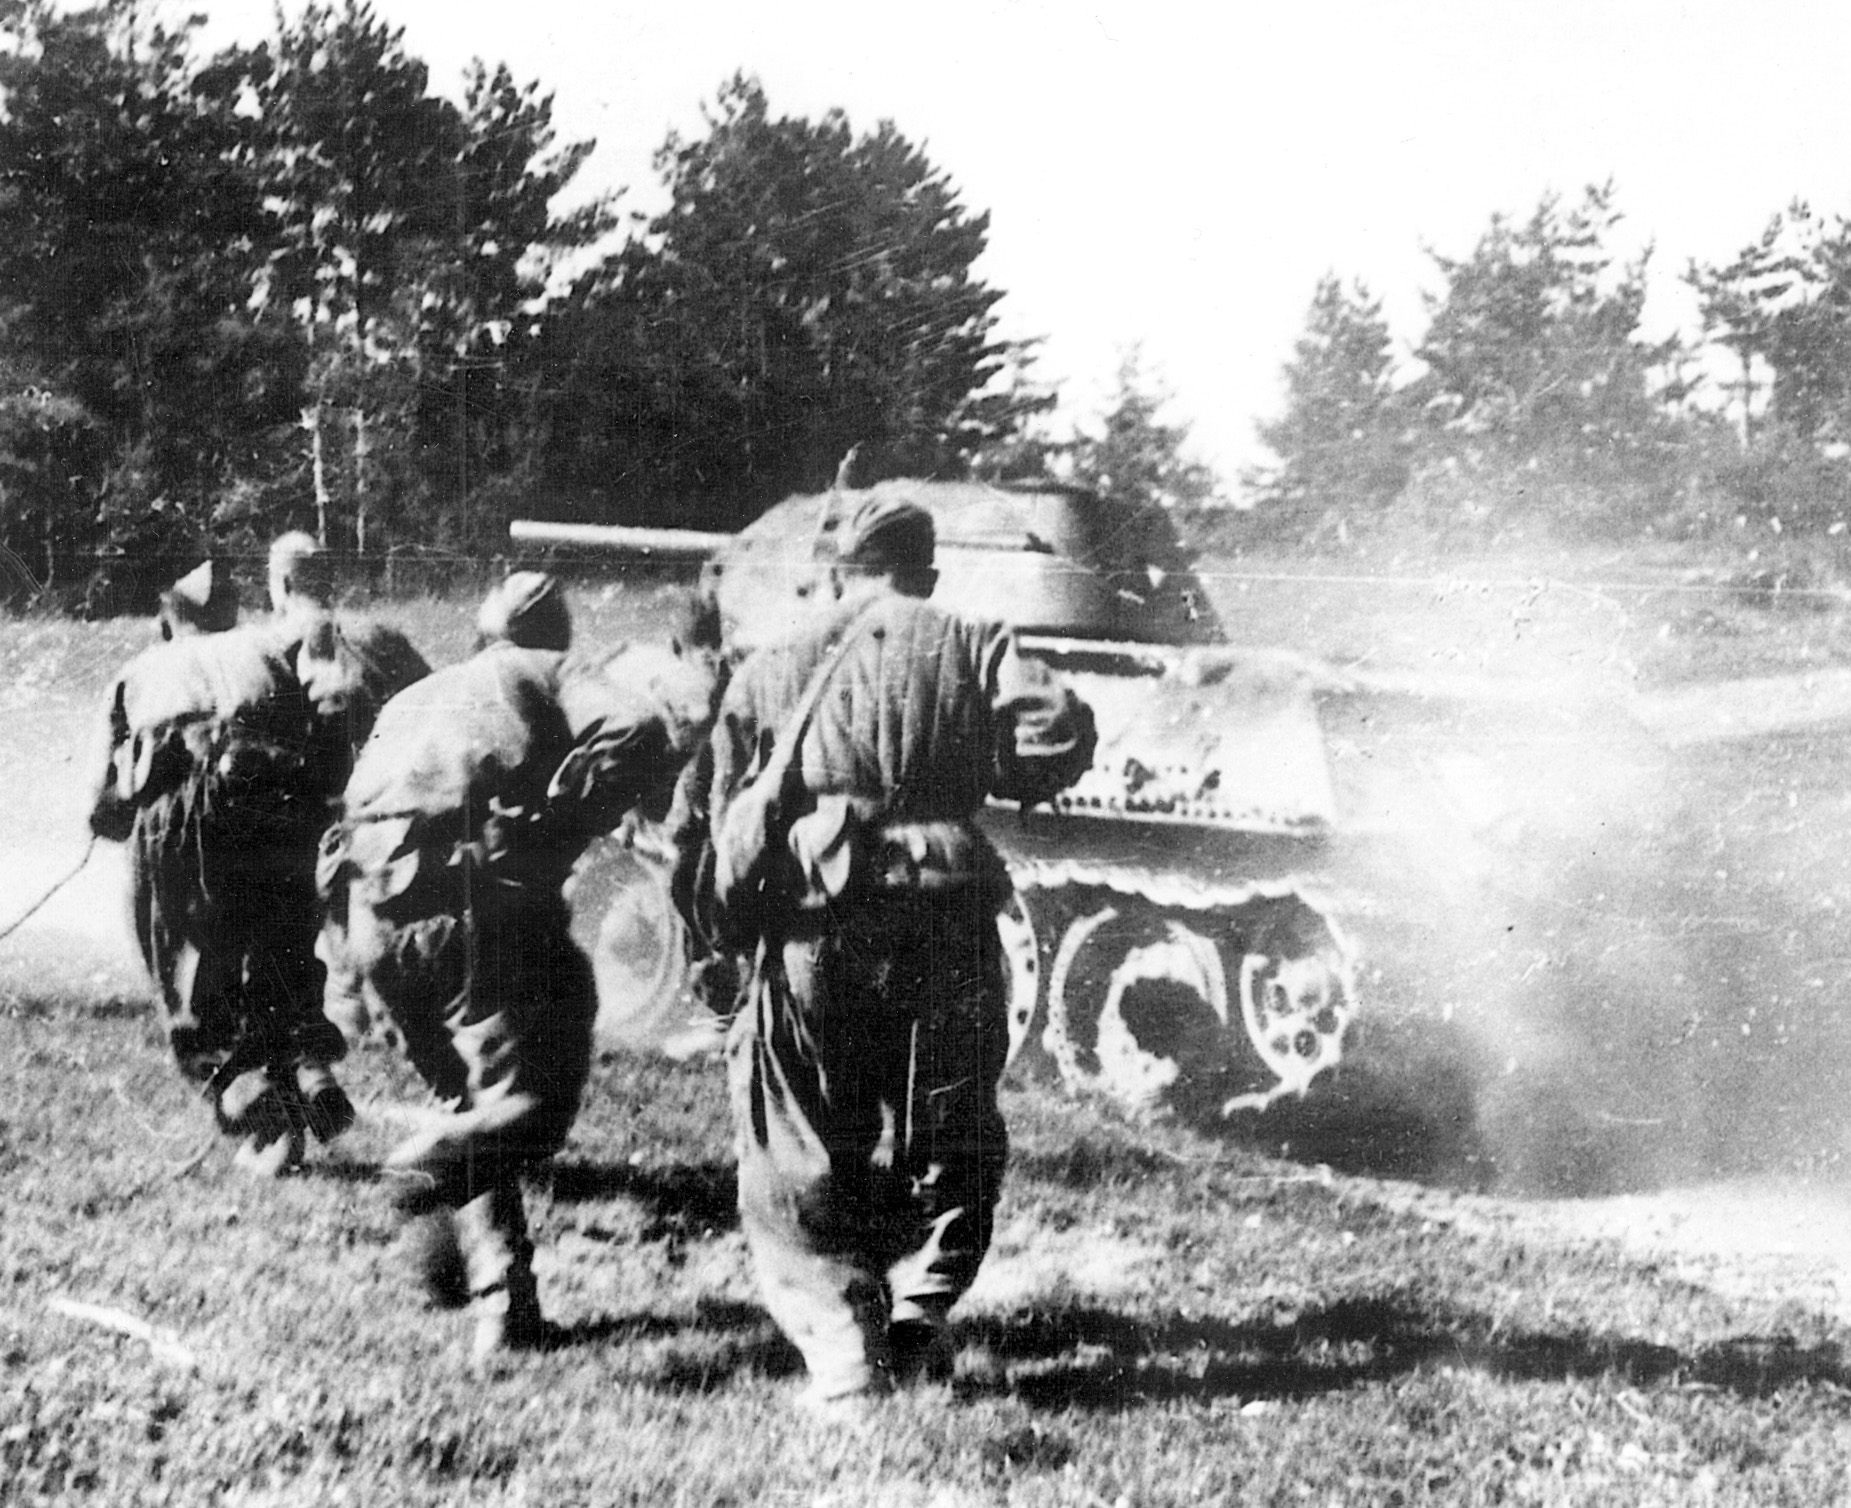 An advancing T-34 tank stirs up a cloud of summertime dust as Red Army soldiers crouch behind it. The Soviet armed forces mounted a devastating offensive in 1944, which carried them 
to the gates of Berlin.